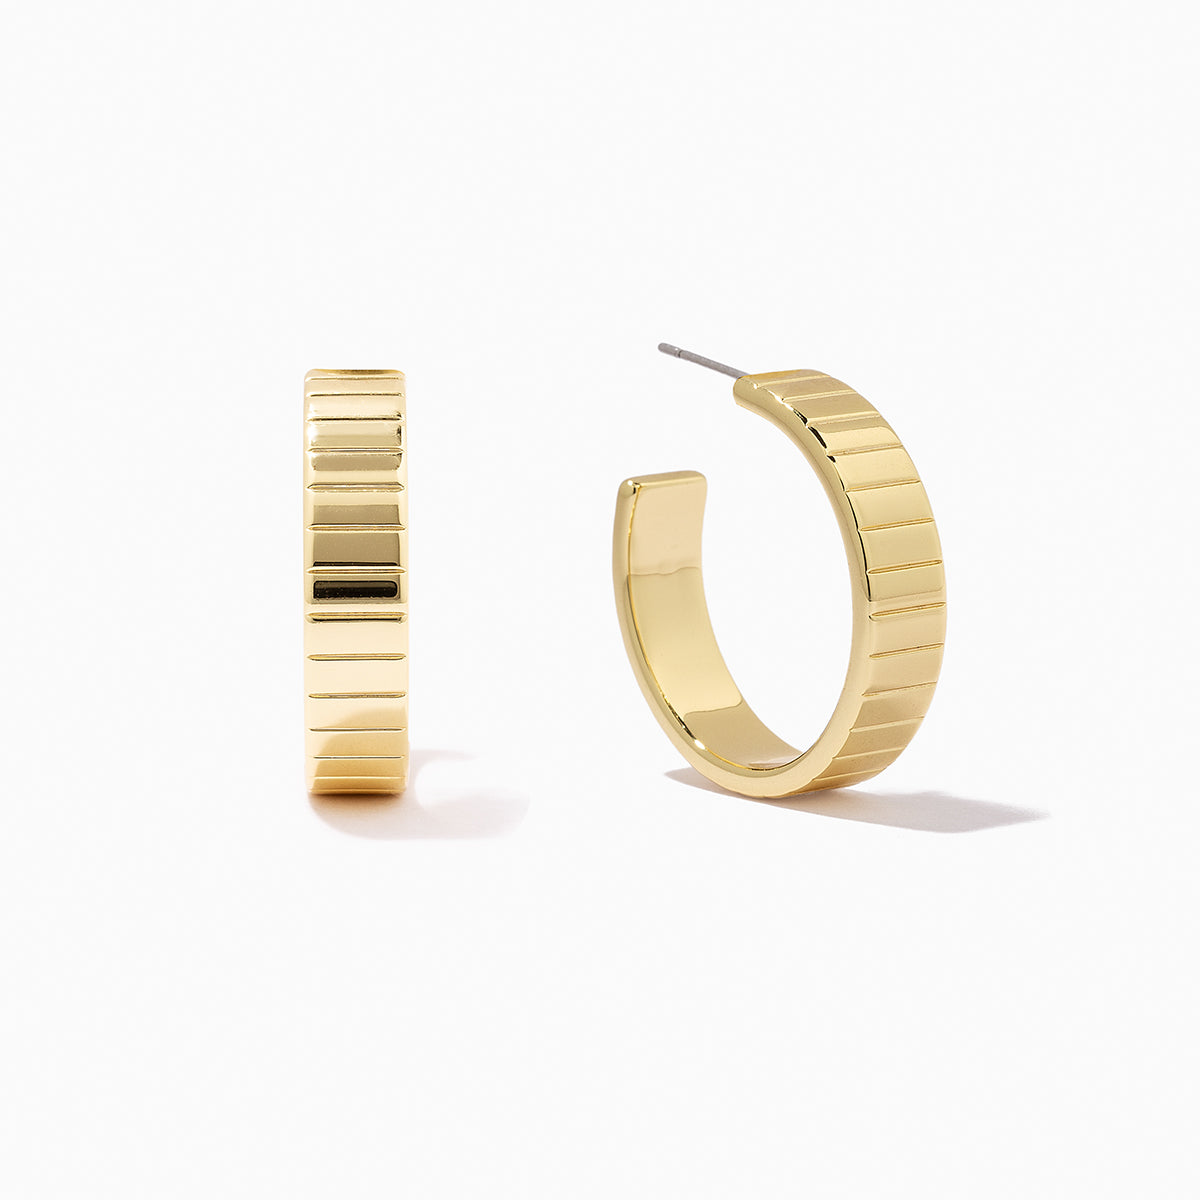 Pave the Way Hoop Earrings | Gold | Product Image | Uncommon James